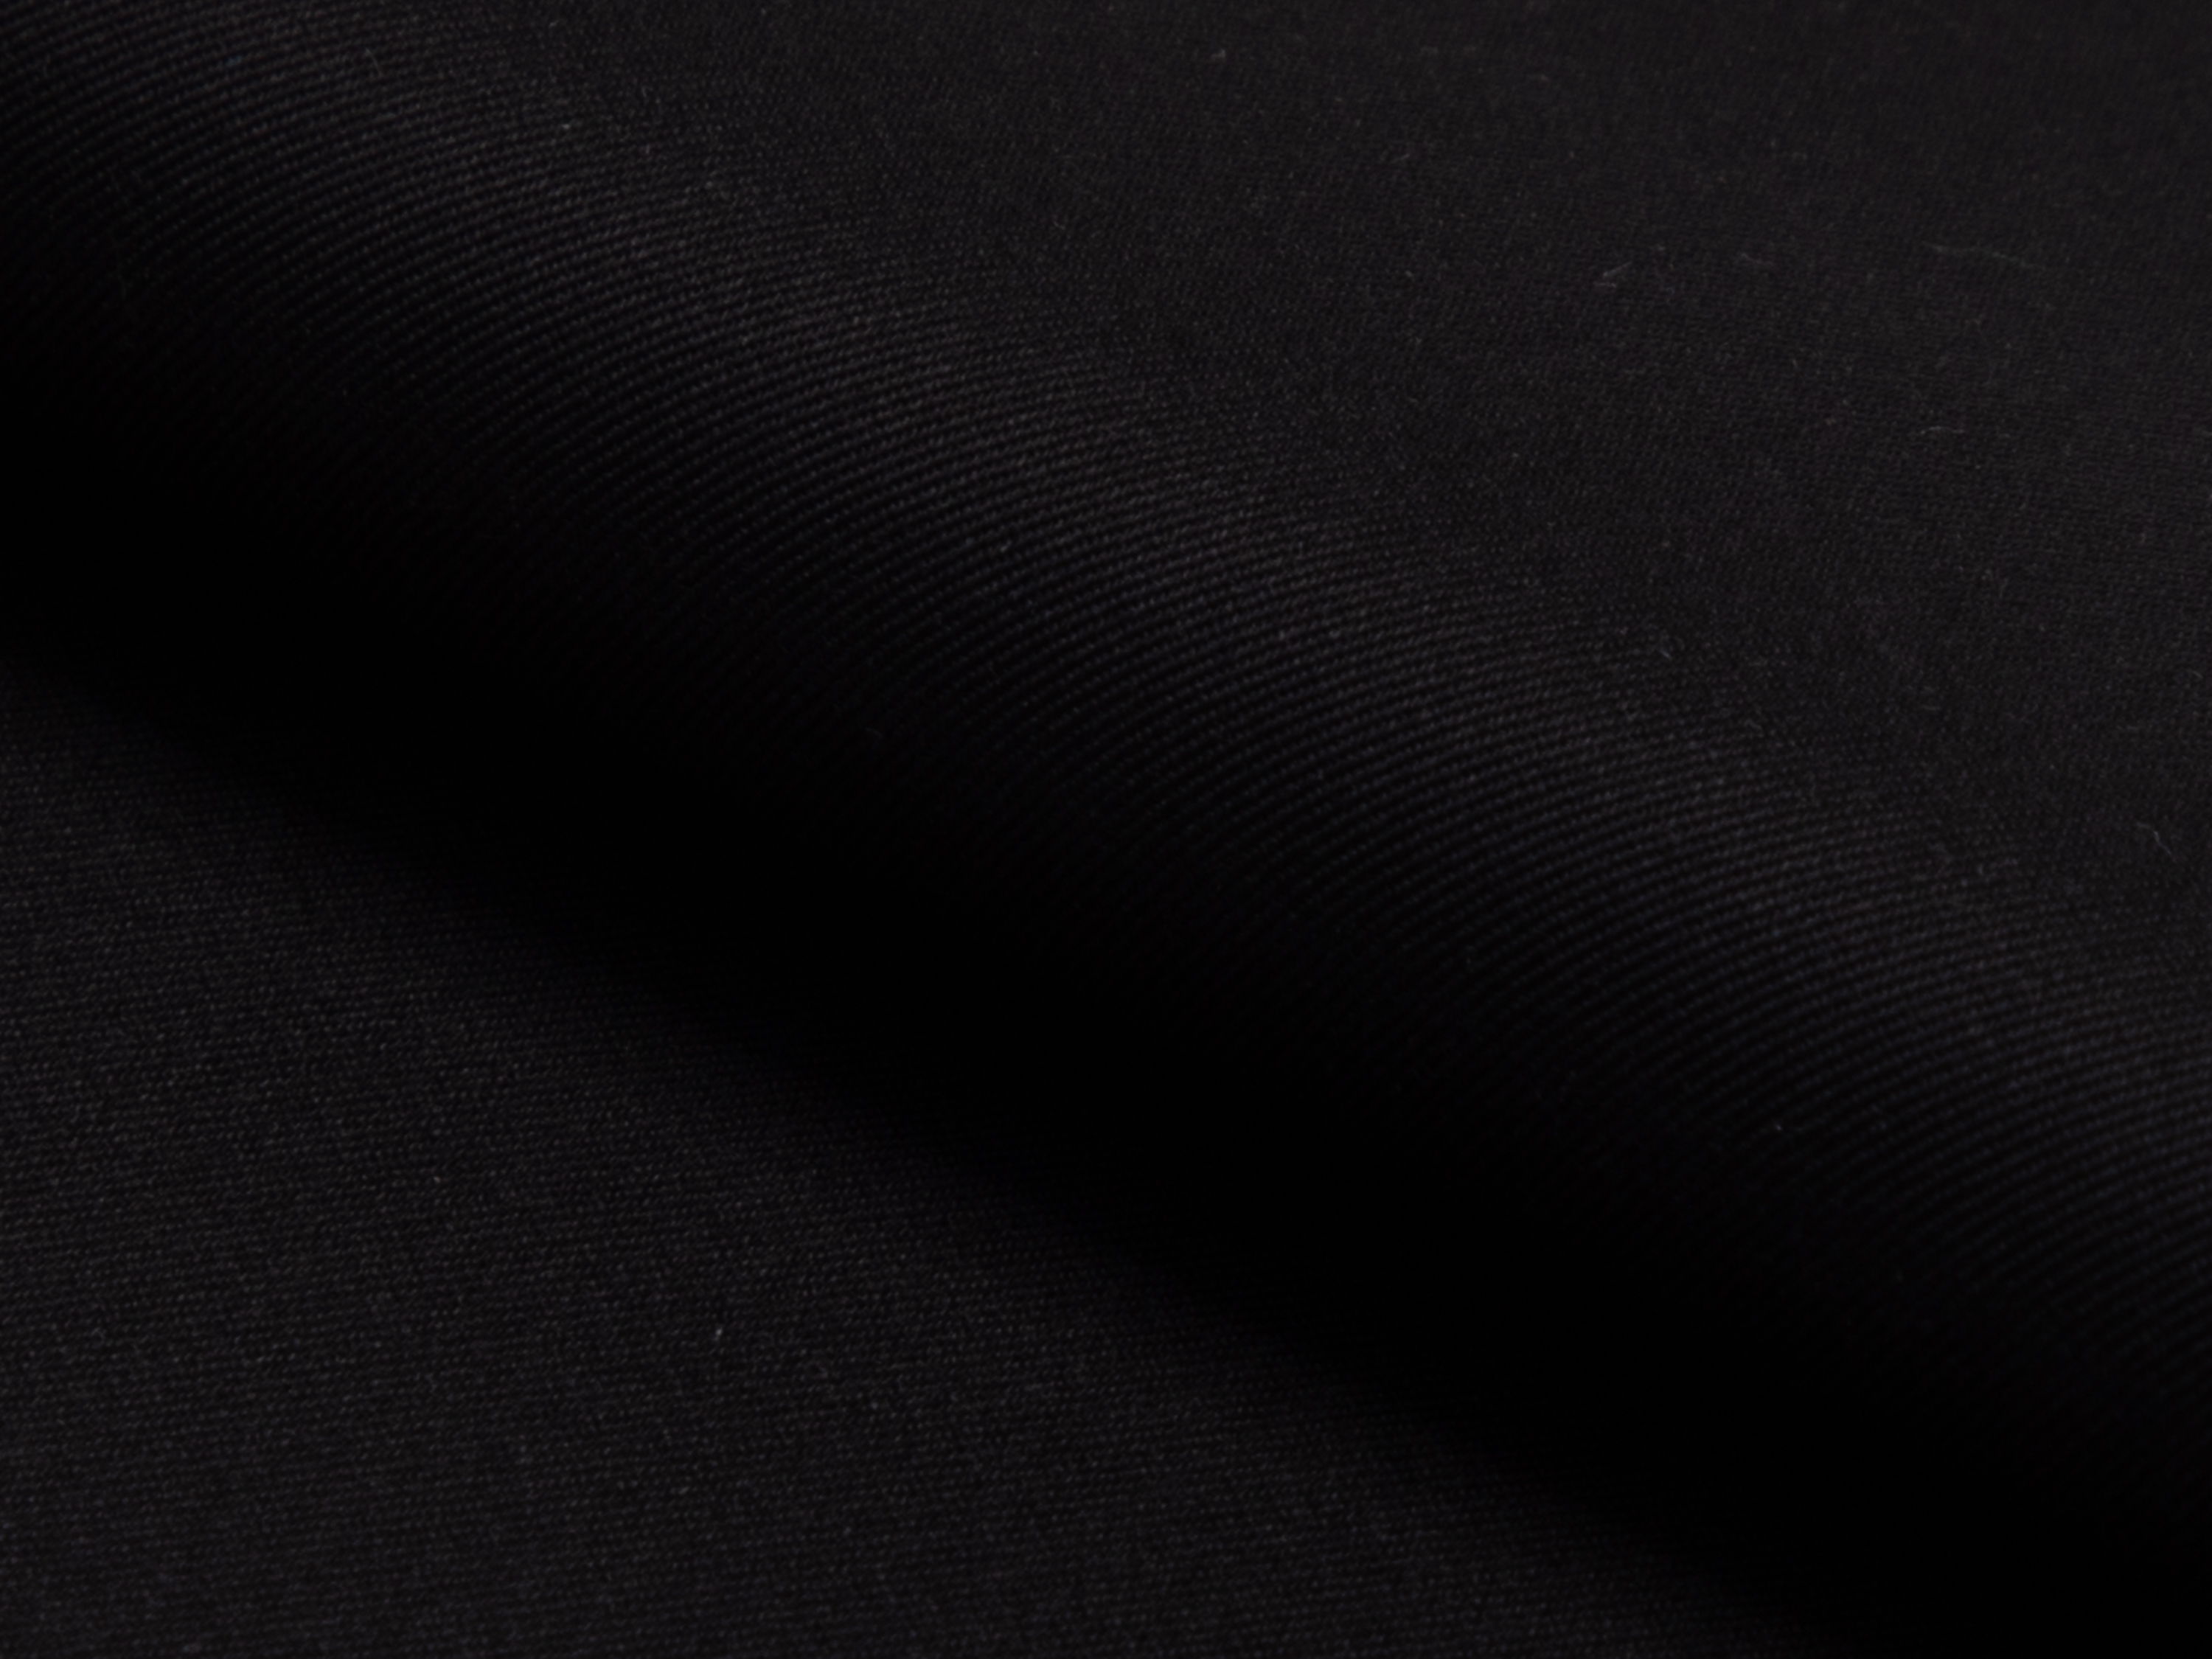 Buy tailor made shirts online - MAYFAIR - Twill Black